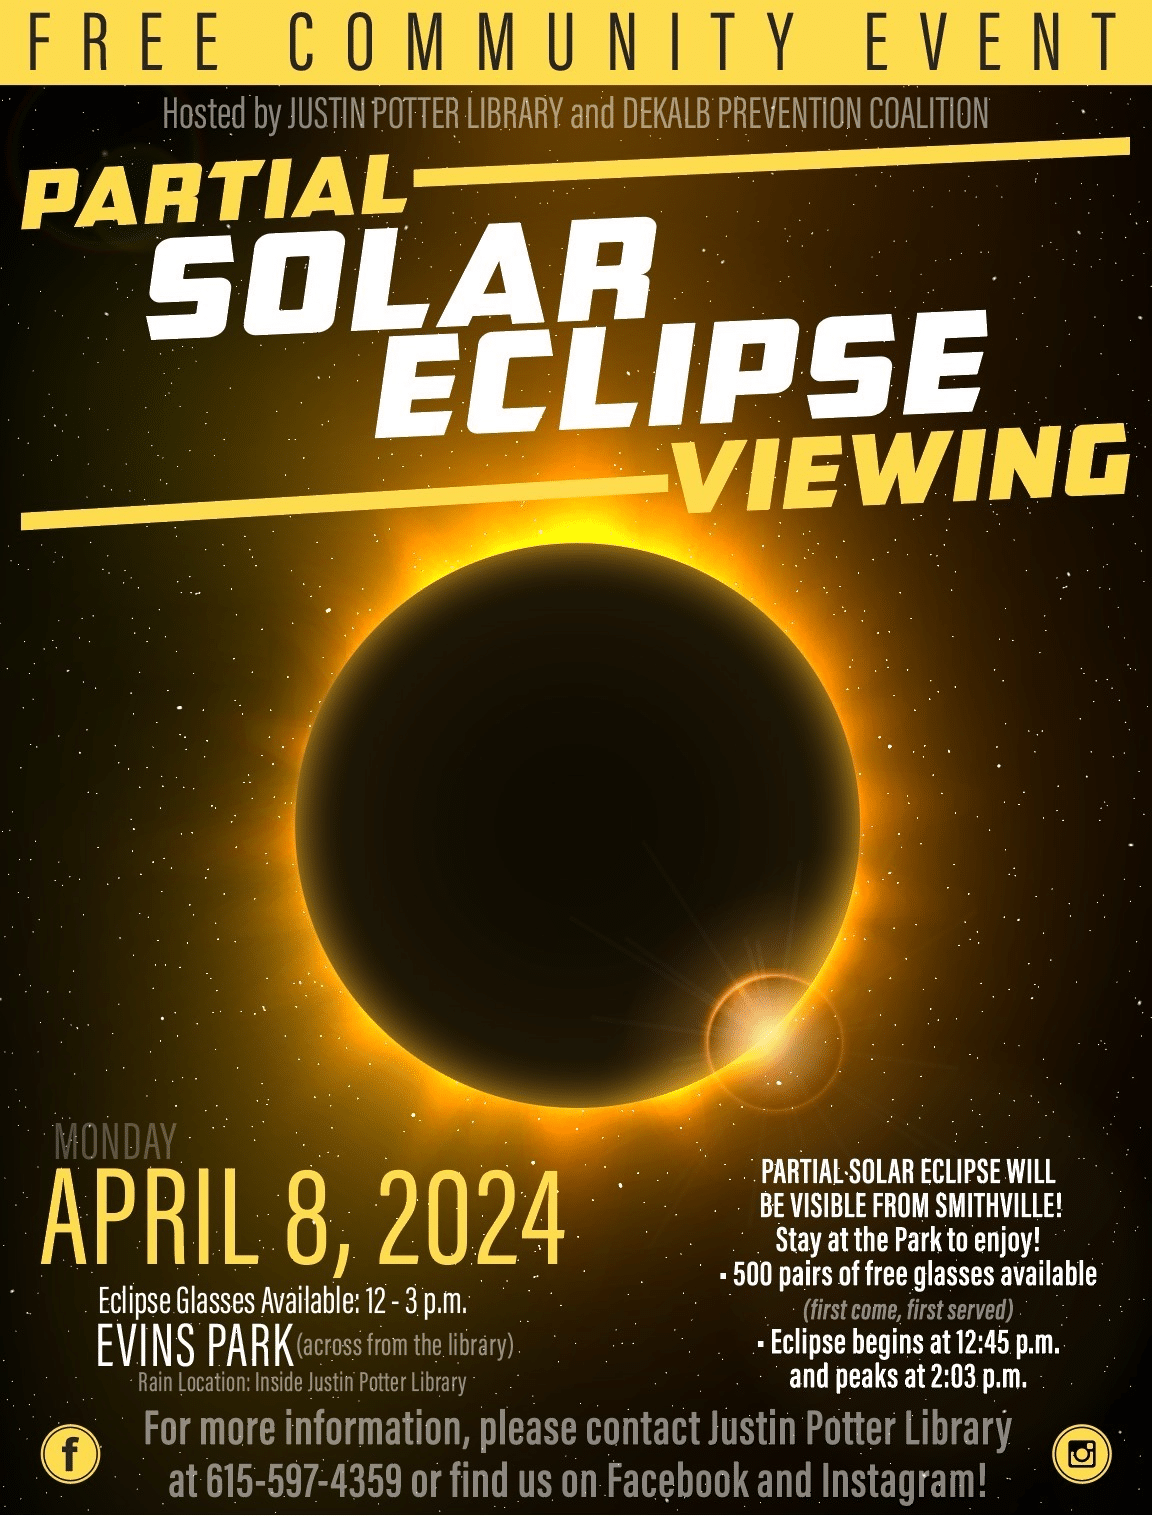 A Partial Solar Eclipse Viewing hosted by Justin Potter Library and the DeKalb Prevention Coalition will be Monday, April 8 at Evins Park across from the Library. This is a Free Community Event! The partial solar eclipse will be visible from Smithville beginning at 12:45 p.m. and peaking at 2:03 p.m. 